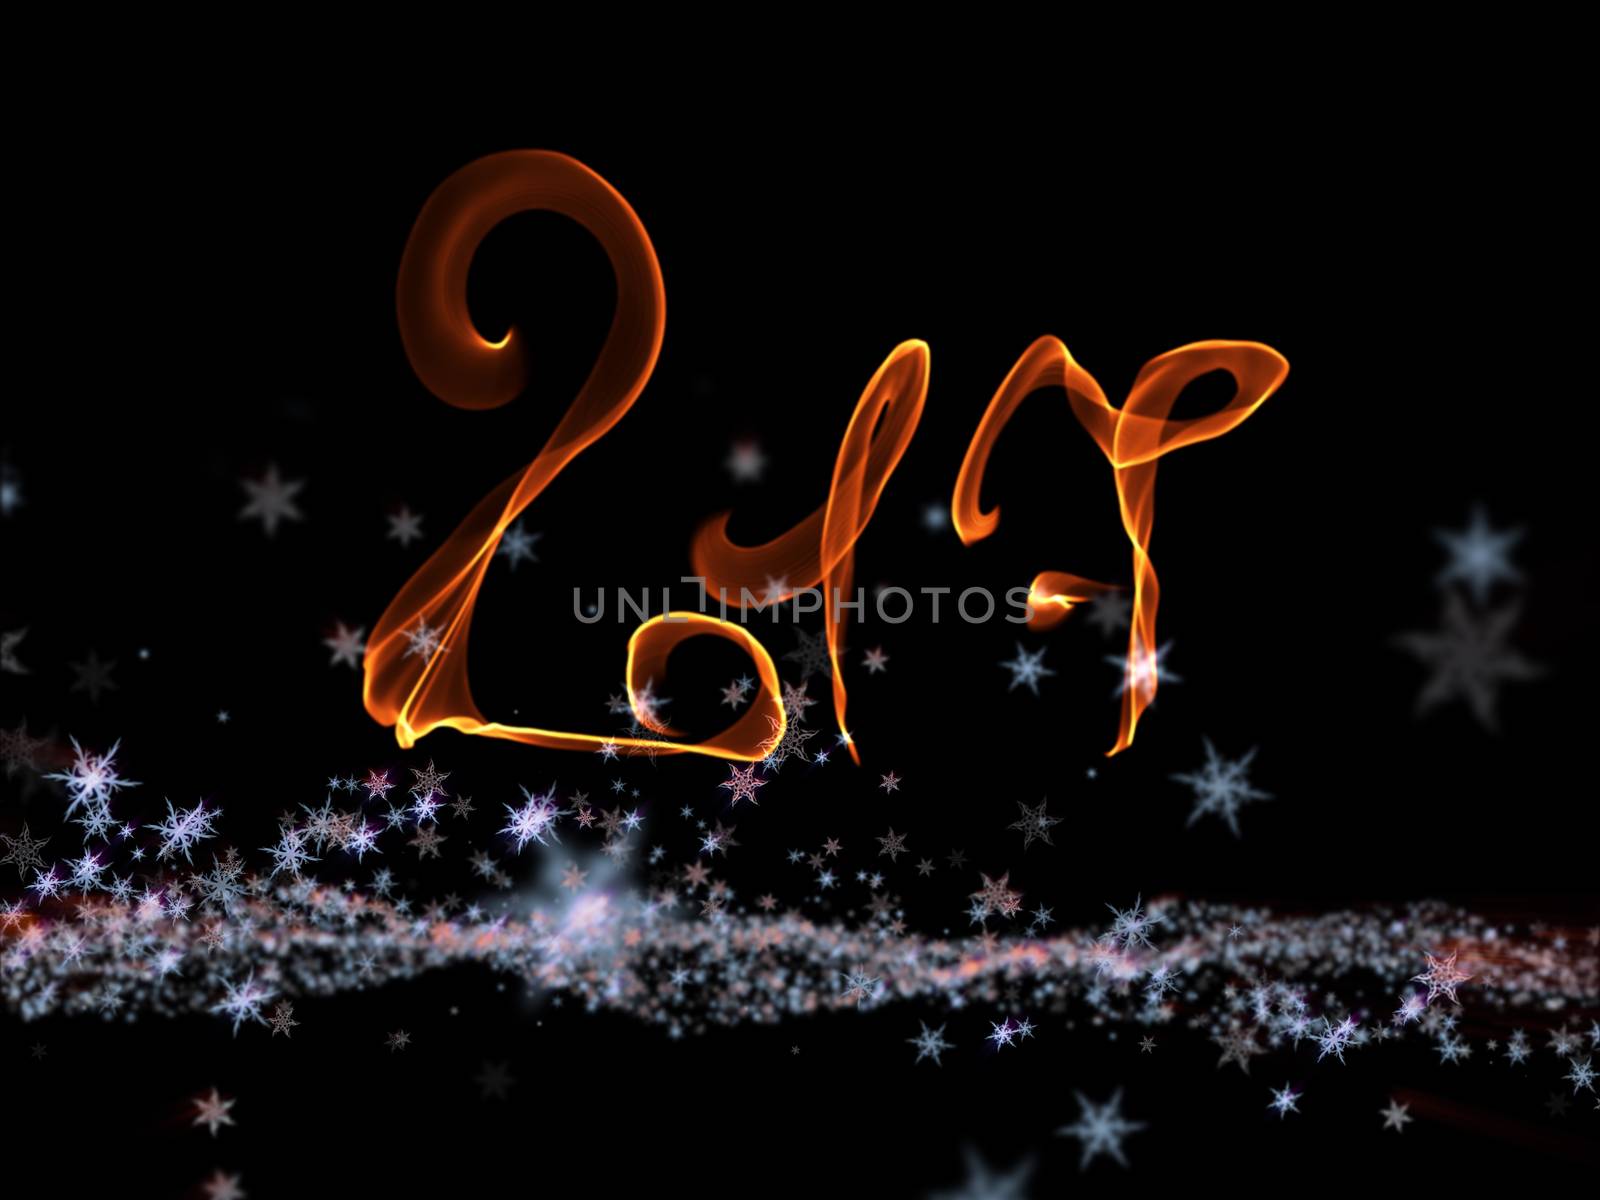 Happy new year 2017 isolated numbers lettering written with fire flame or smoke on black background.